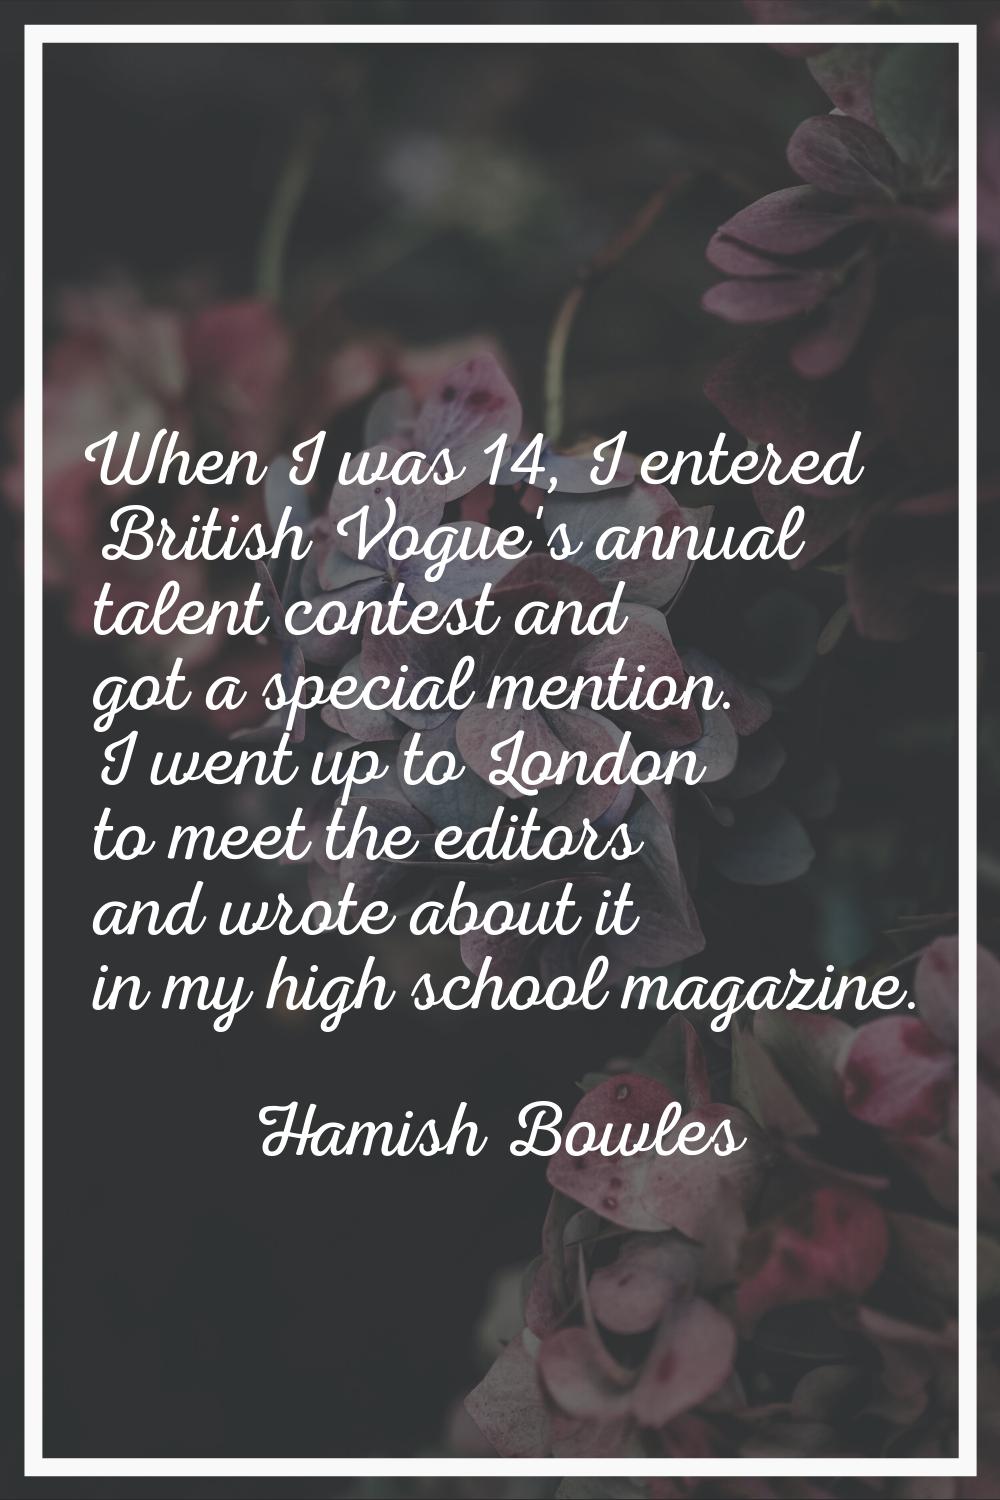 When I was 14, I entered British Vogue's annual talent contest and got a special mention. I went up